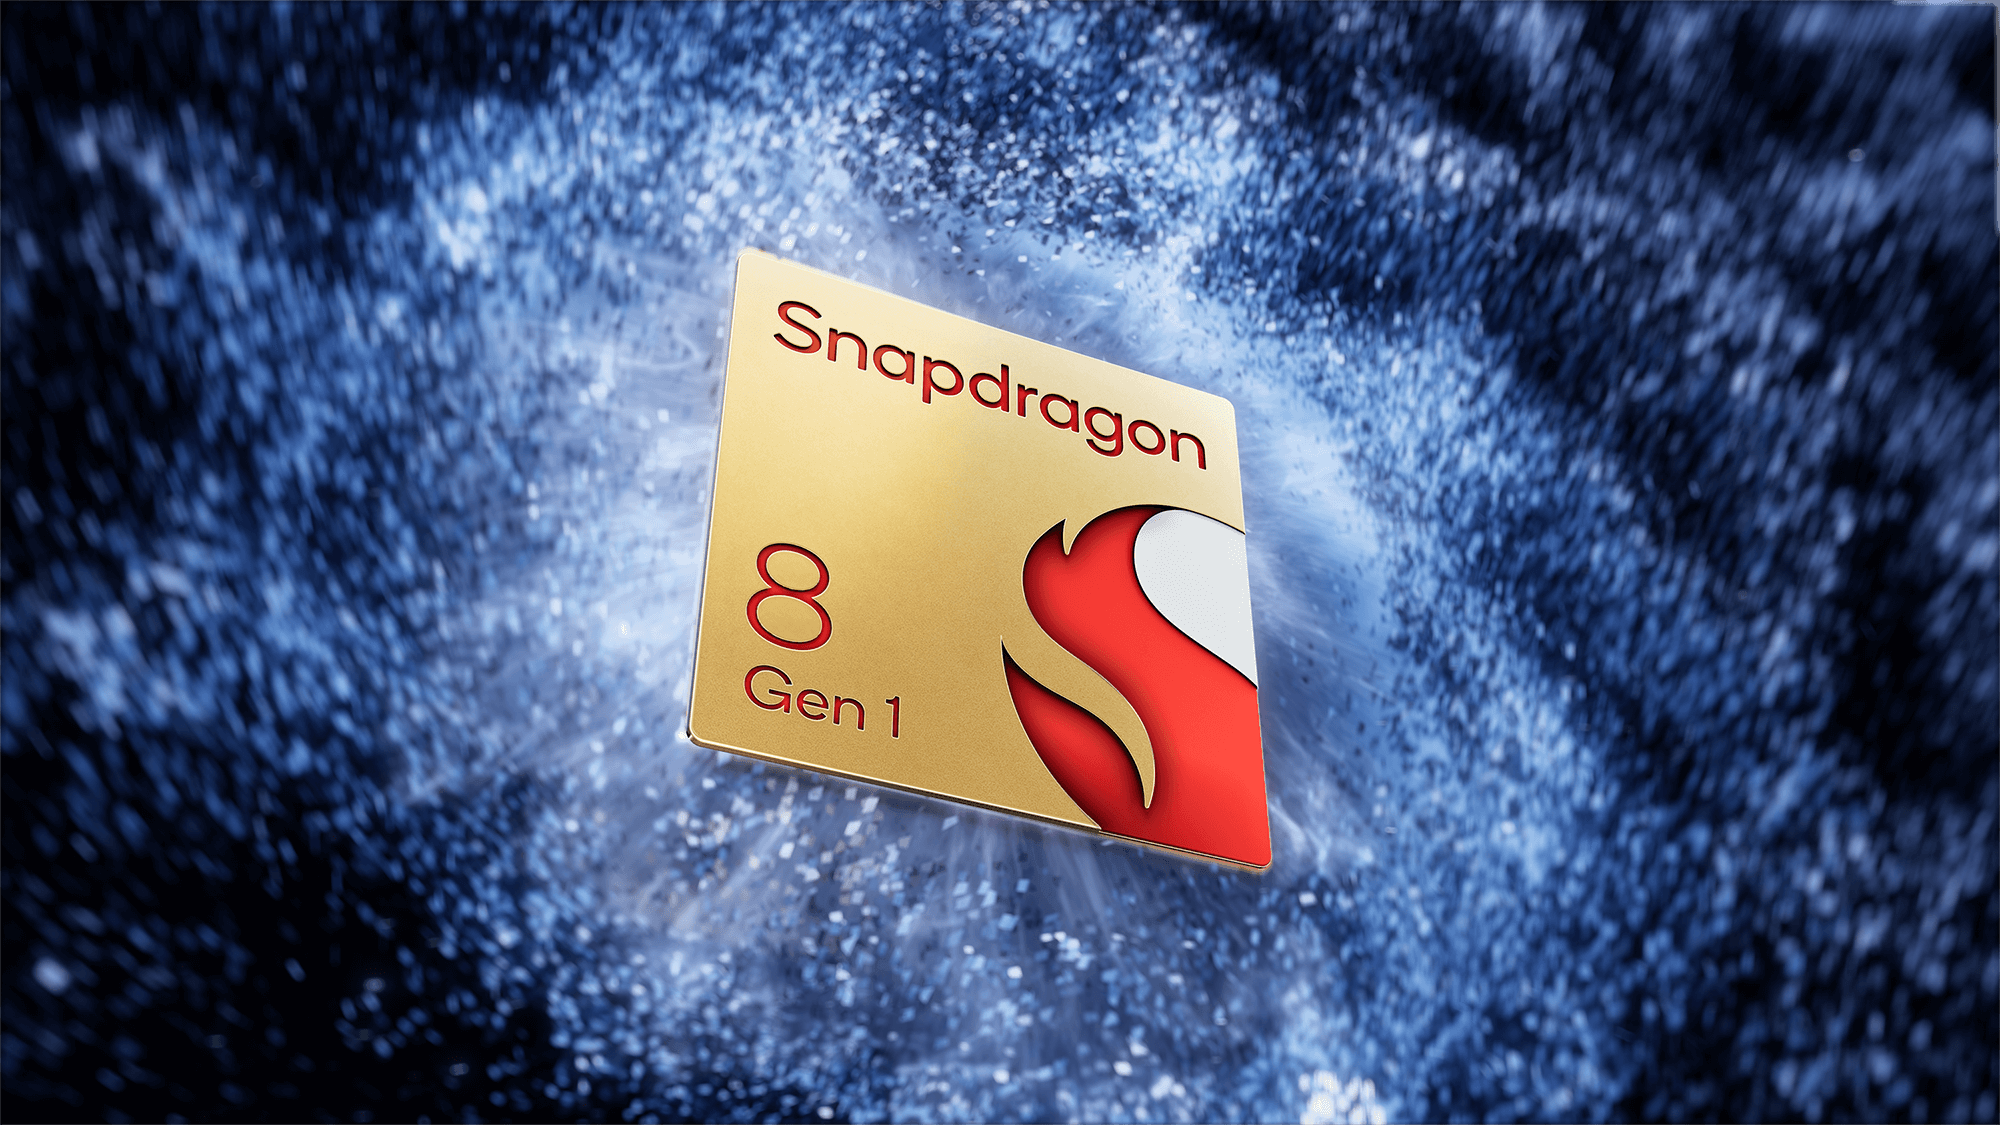 Official list of manufacturers that will use the Snapdragon 8 Gen1 chip